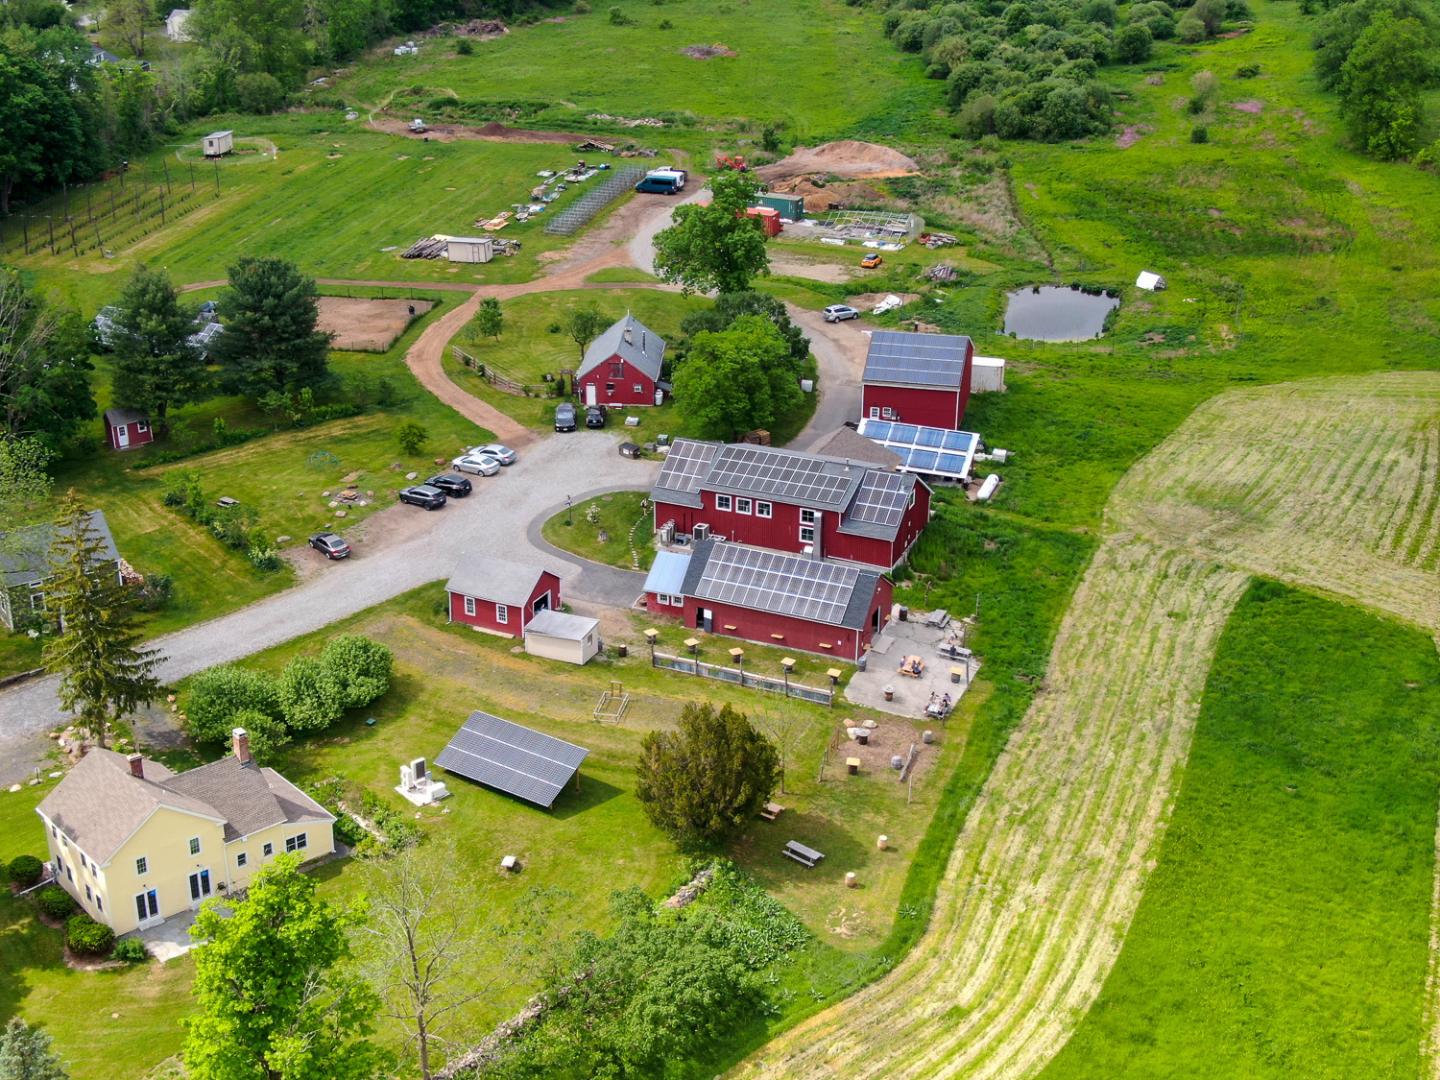 A drone shot of farmhouses with solar panels covering the roofs